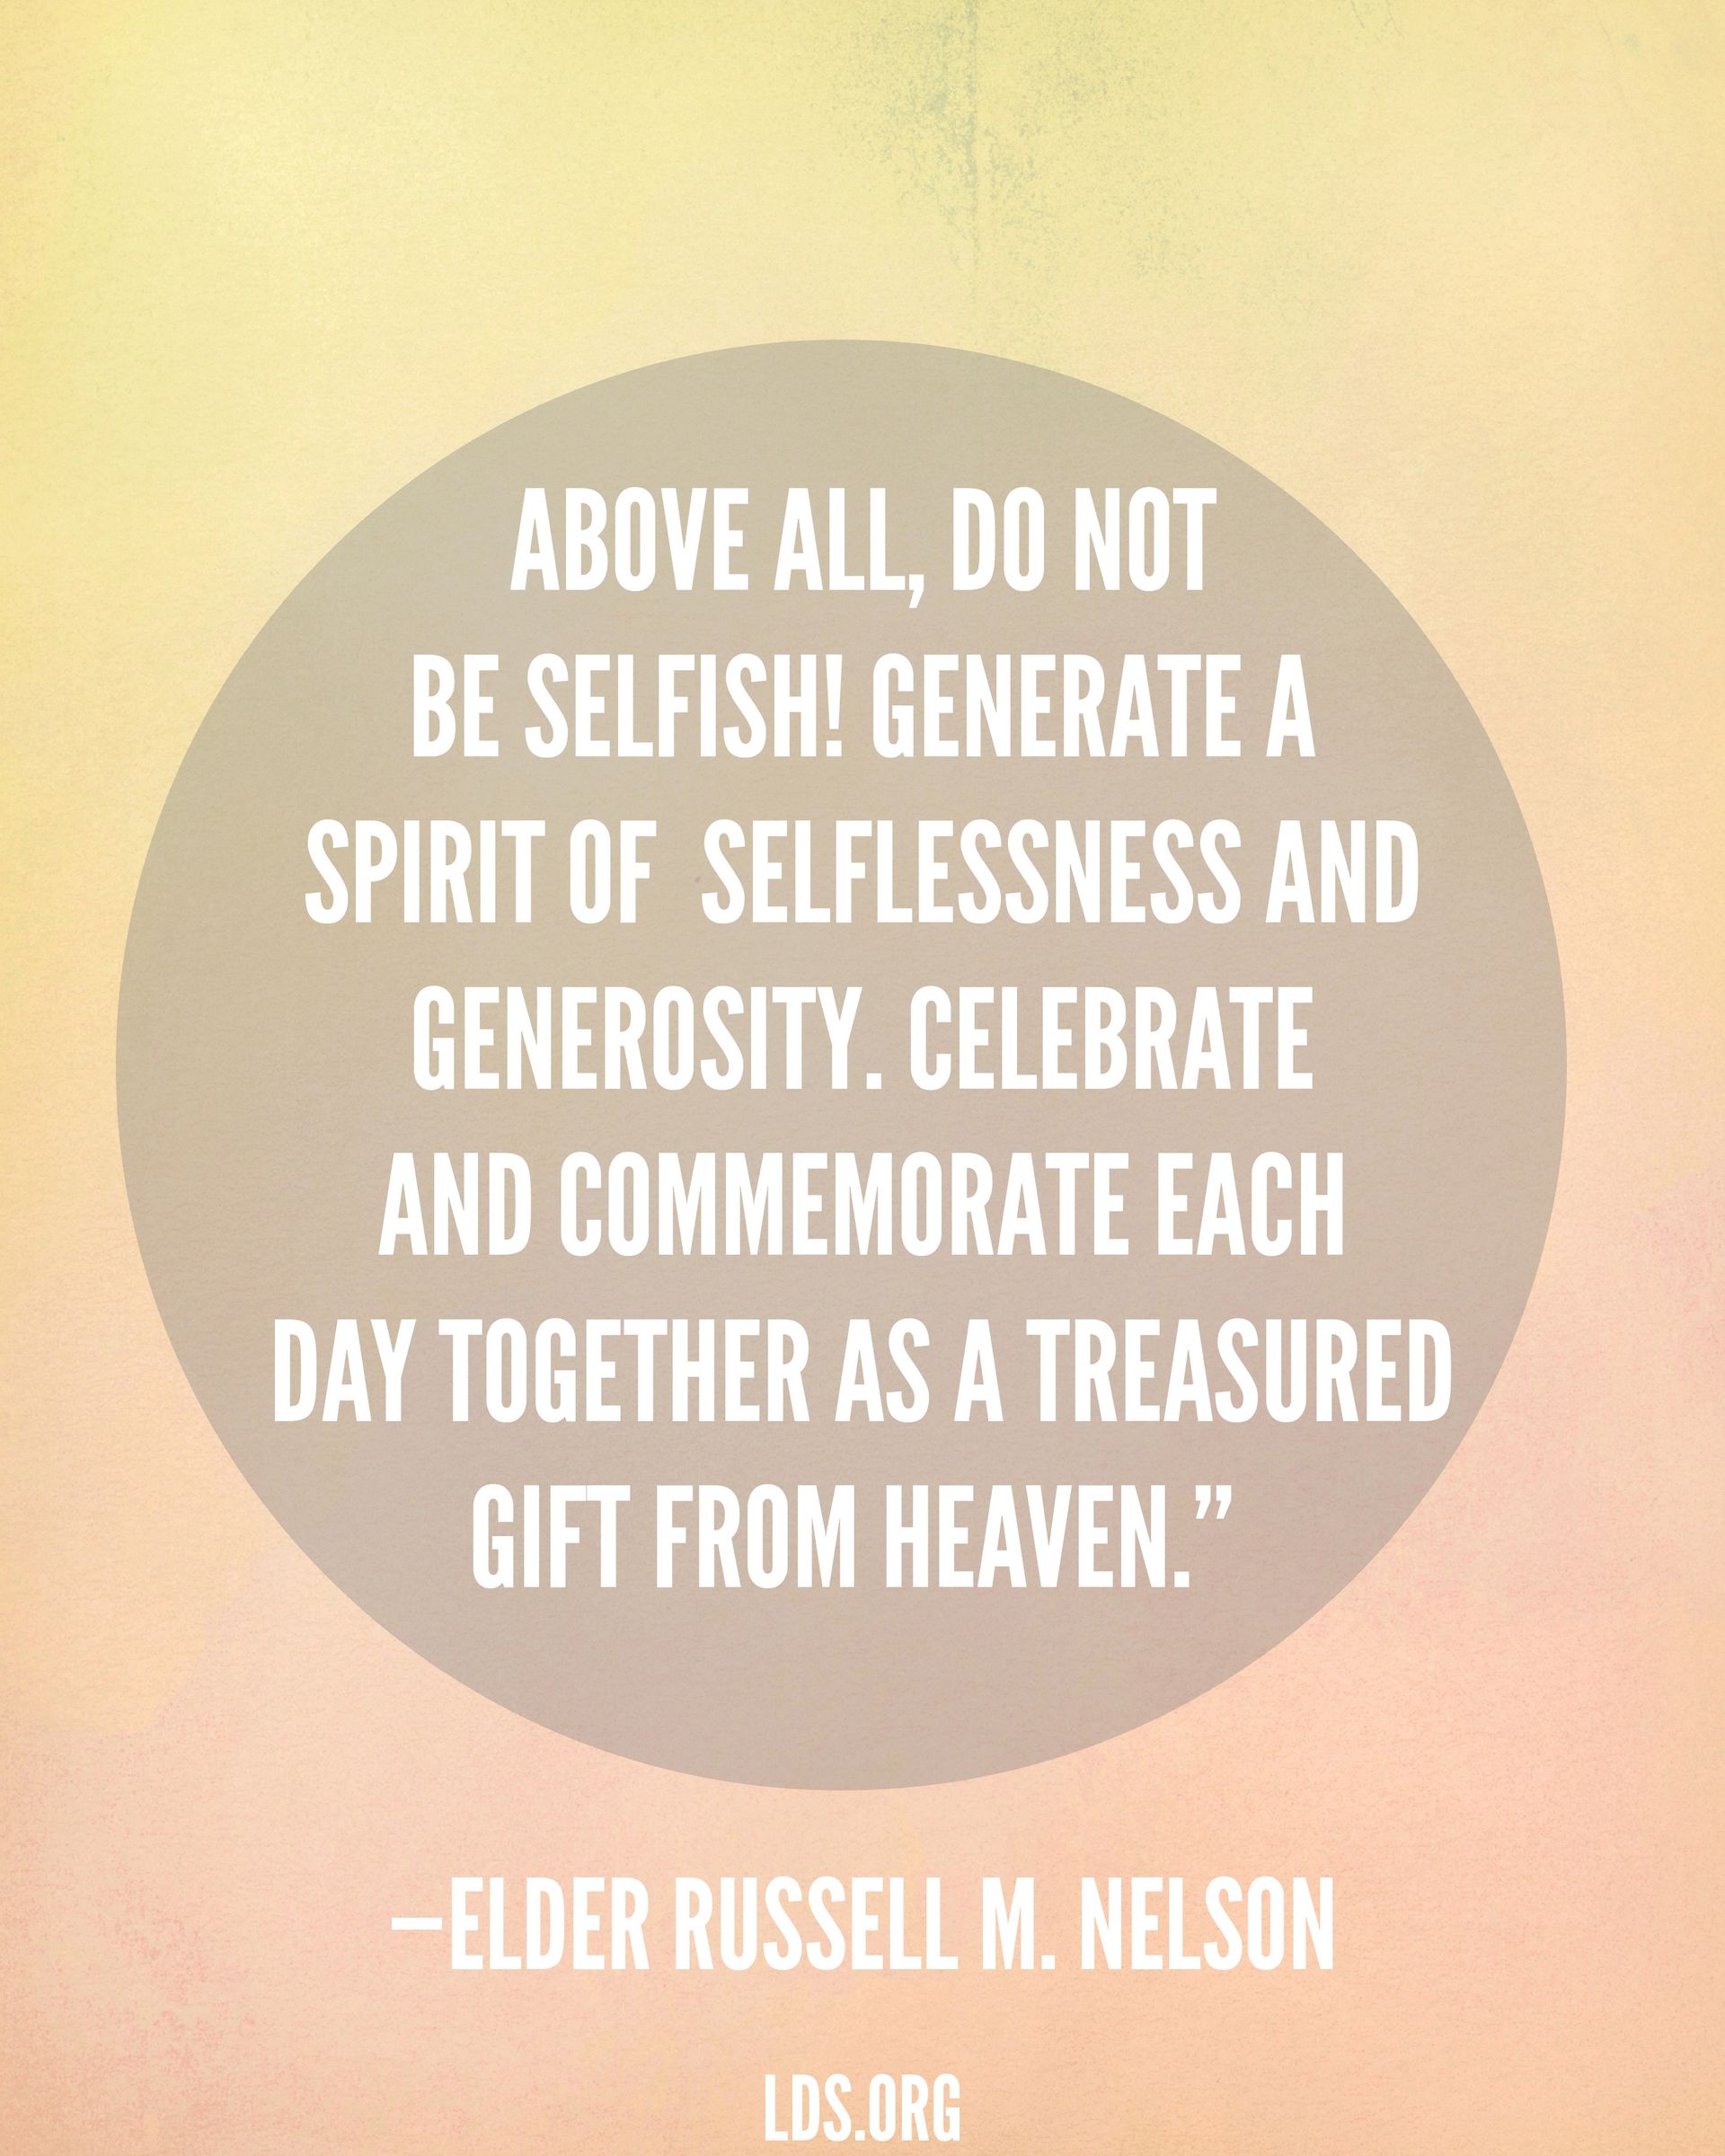 “Above all, do not be selfish! Generate a spirit of selflessness and generosity. Celebrate and commemorate each day together as a treasured gift from heaven.”—President Russell M. Nelson, “Nurturing Marriage”